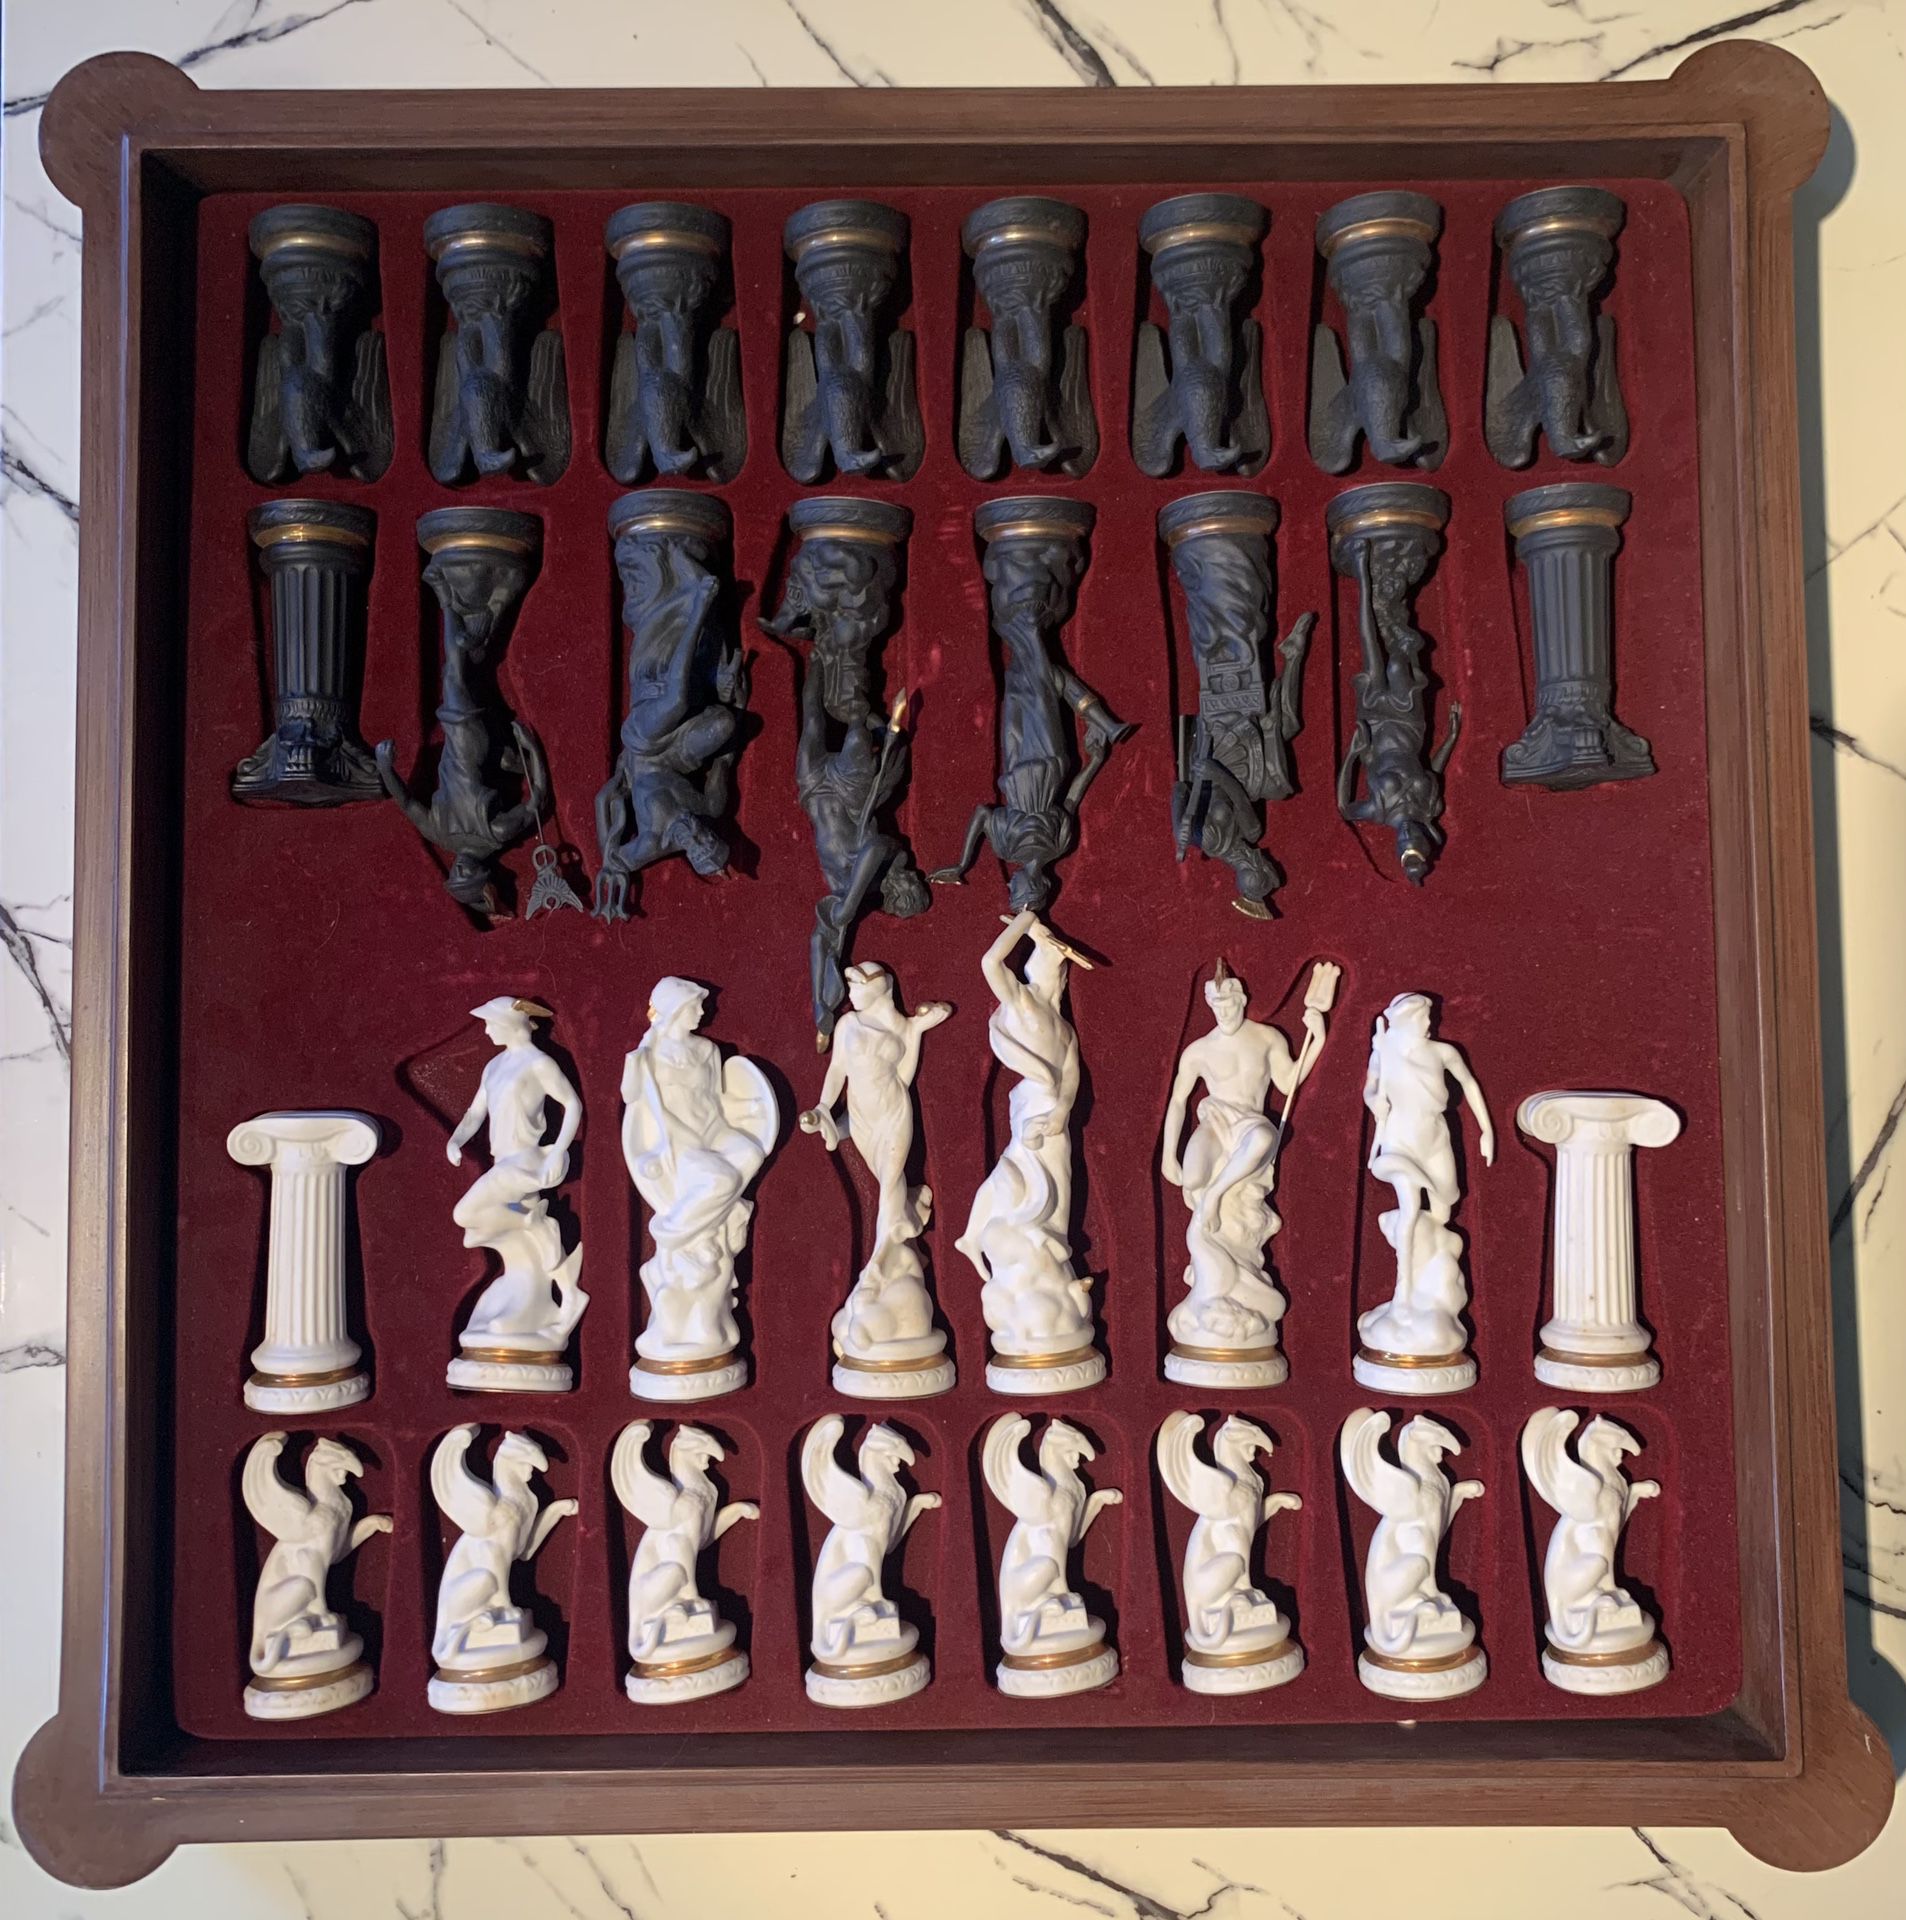 Franklin Mint Chess Set Of The Gods